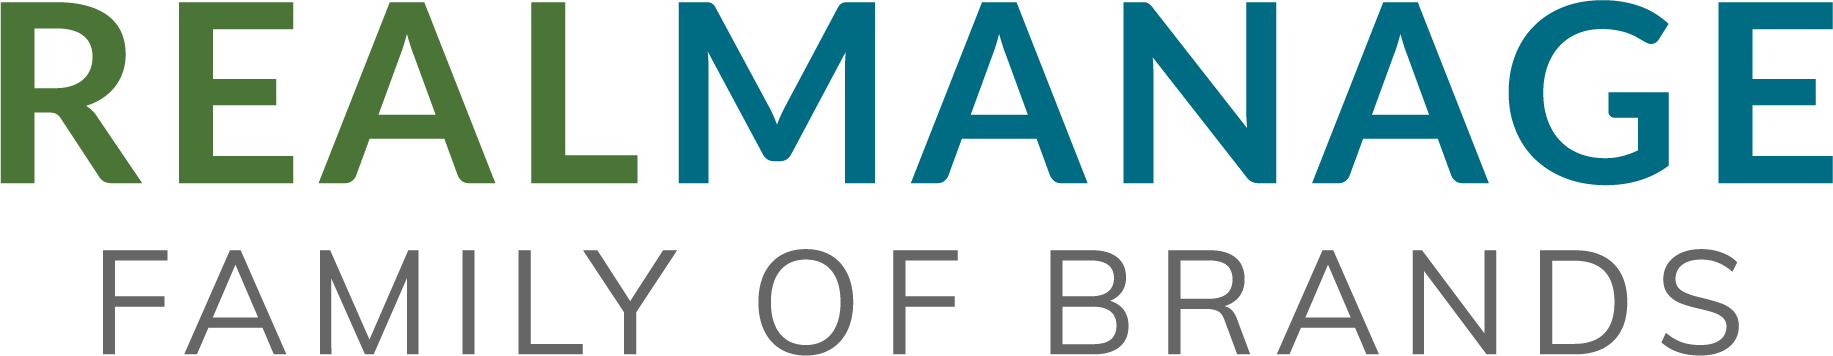 RealManage Family of Brands logo